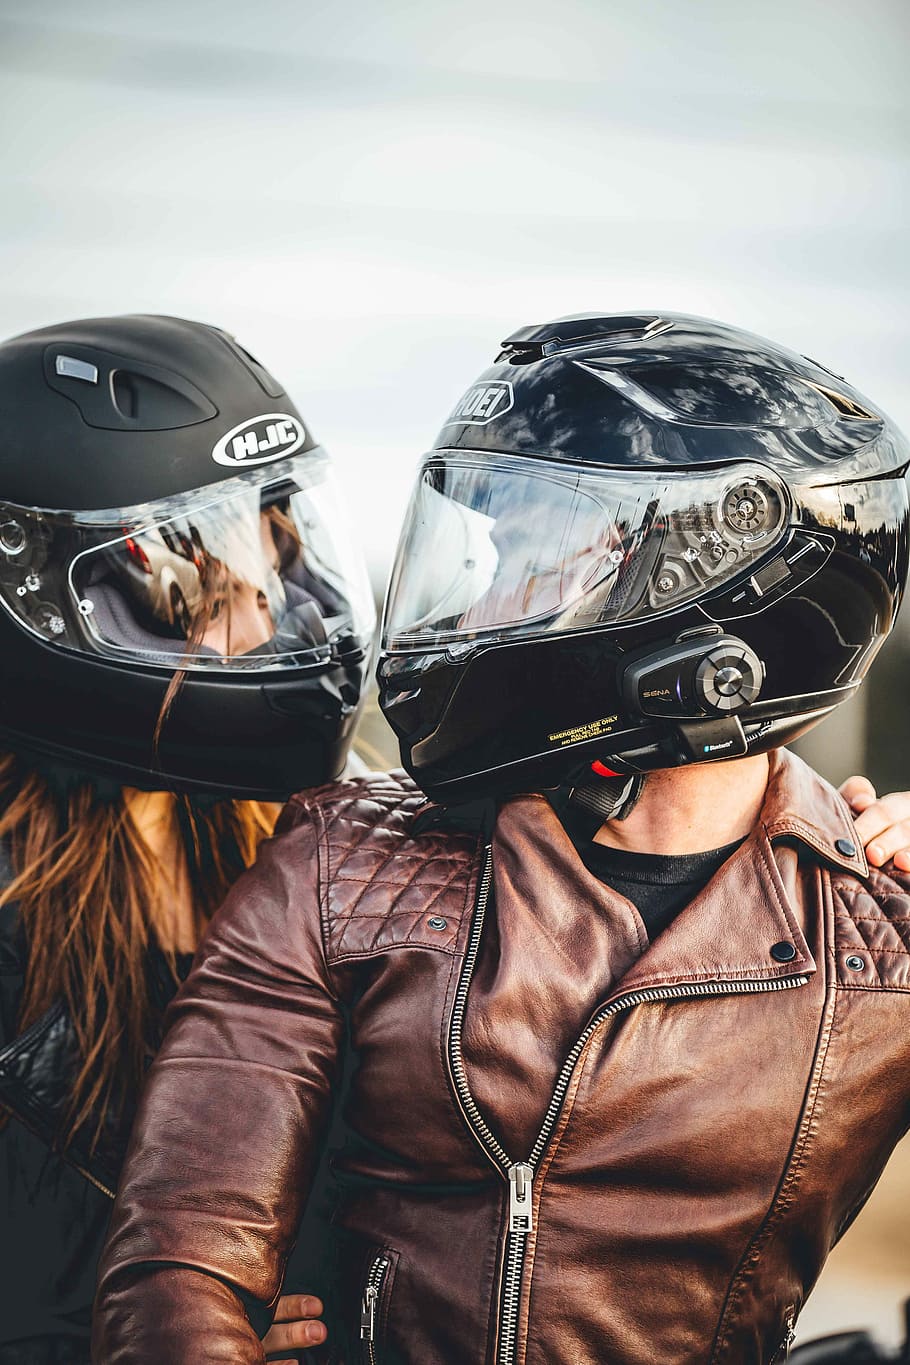 HD wallpaper: man and woman riding motorcycle, helmet, biker, couple,  leather jacket | Wallpaper Flare